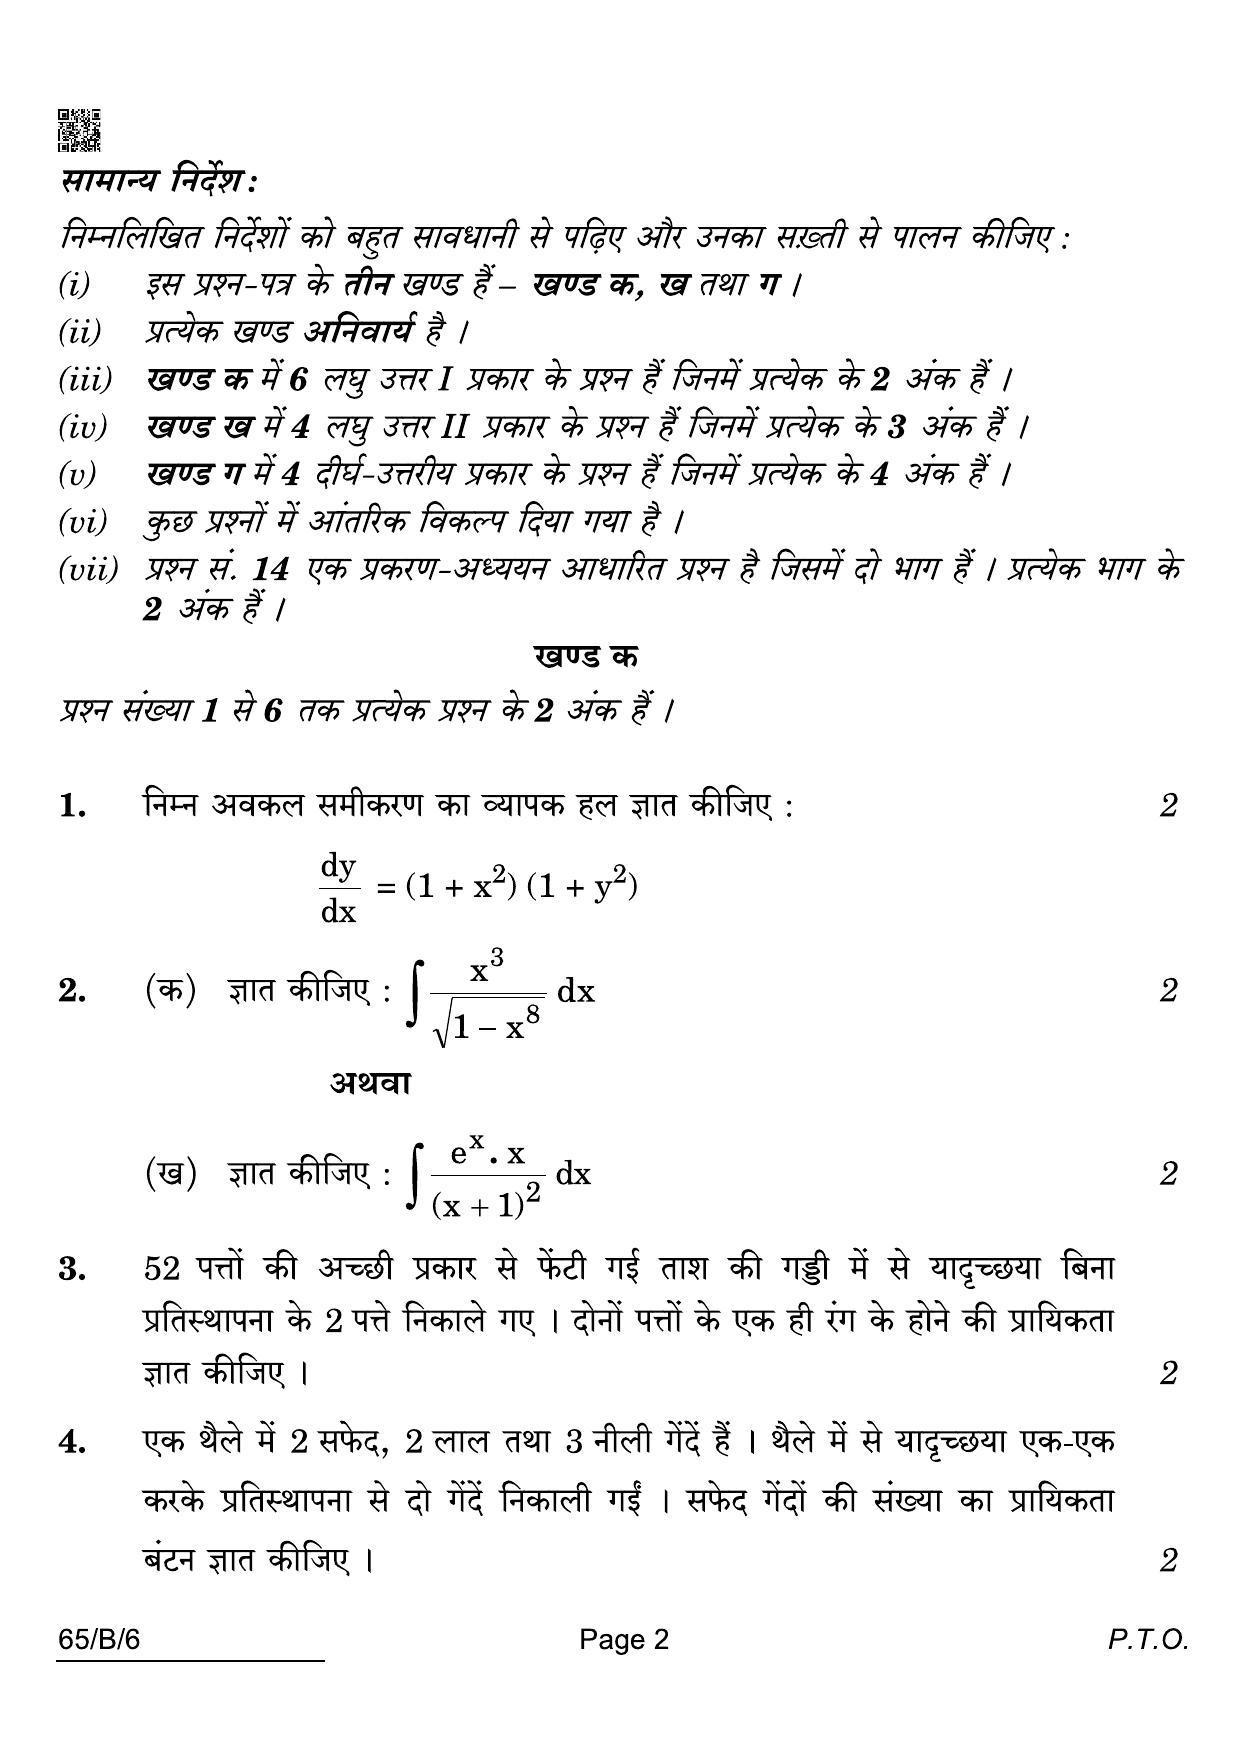 CBSE Class 12 65-B-6 Maths Blind 2022 Compartment Question Paper - Page 2